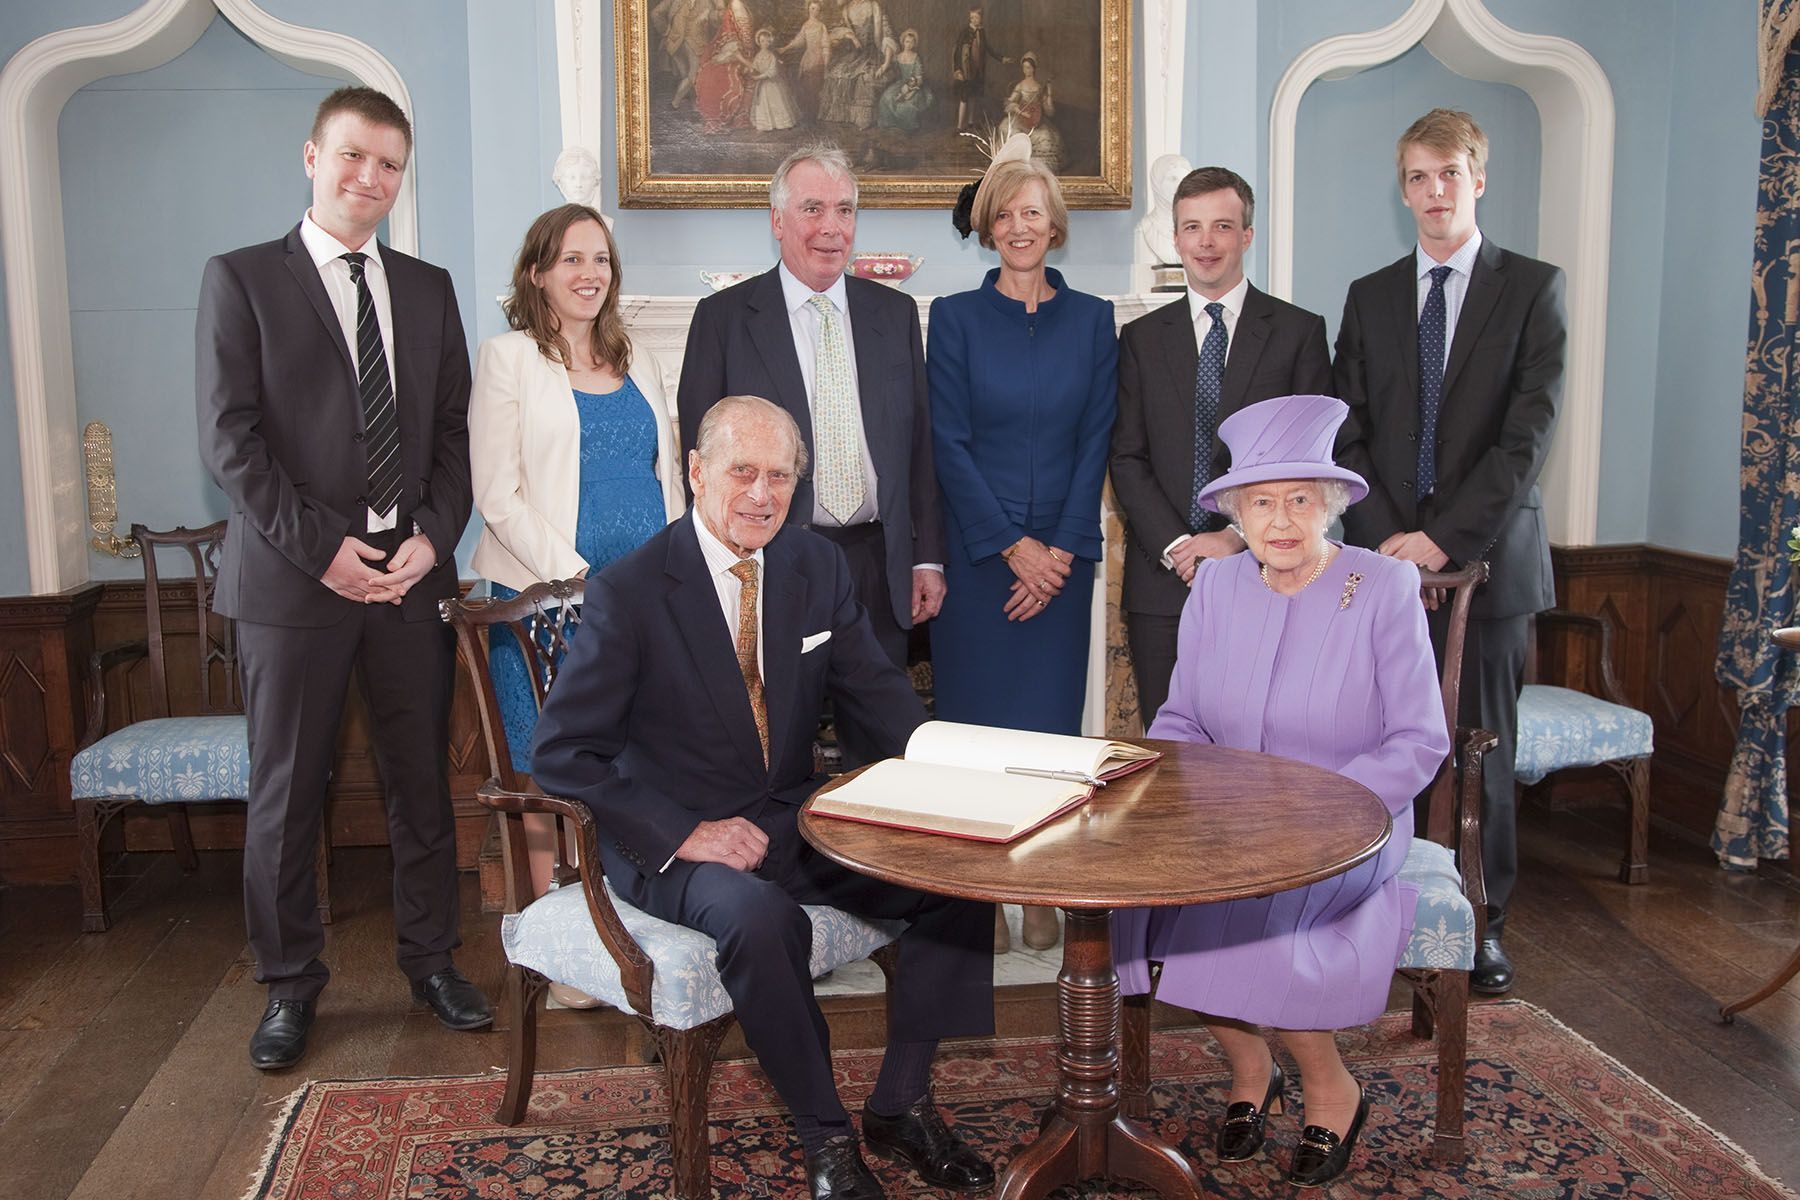 The Queen with the St Aubyn family having signed the vistors book.